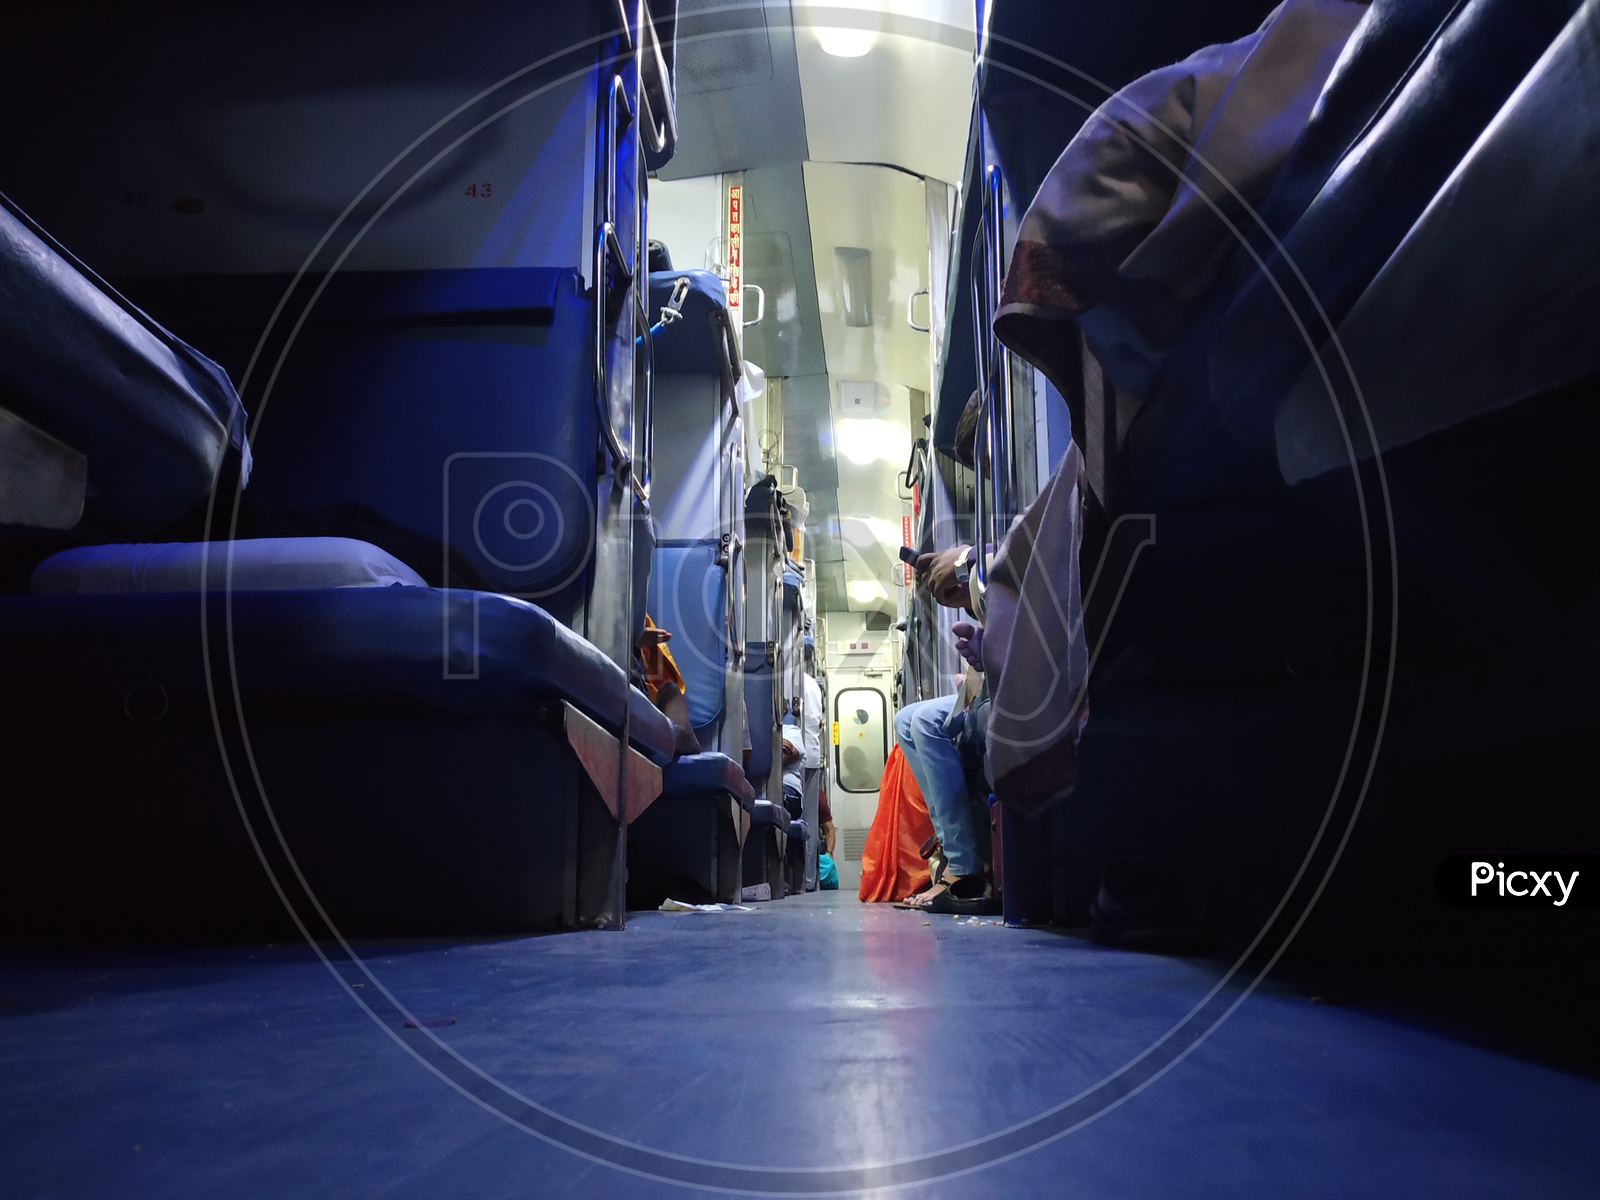 A View Of Pathways In Railway Compartment Bogies With Berths And Passengers  in Indian trains